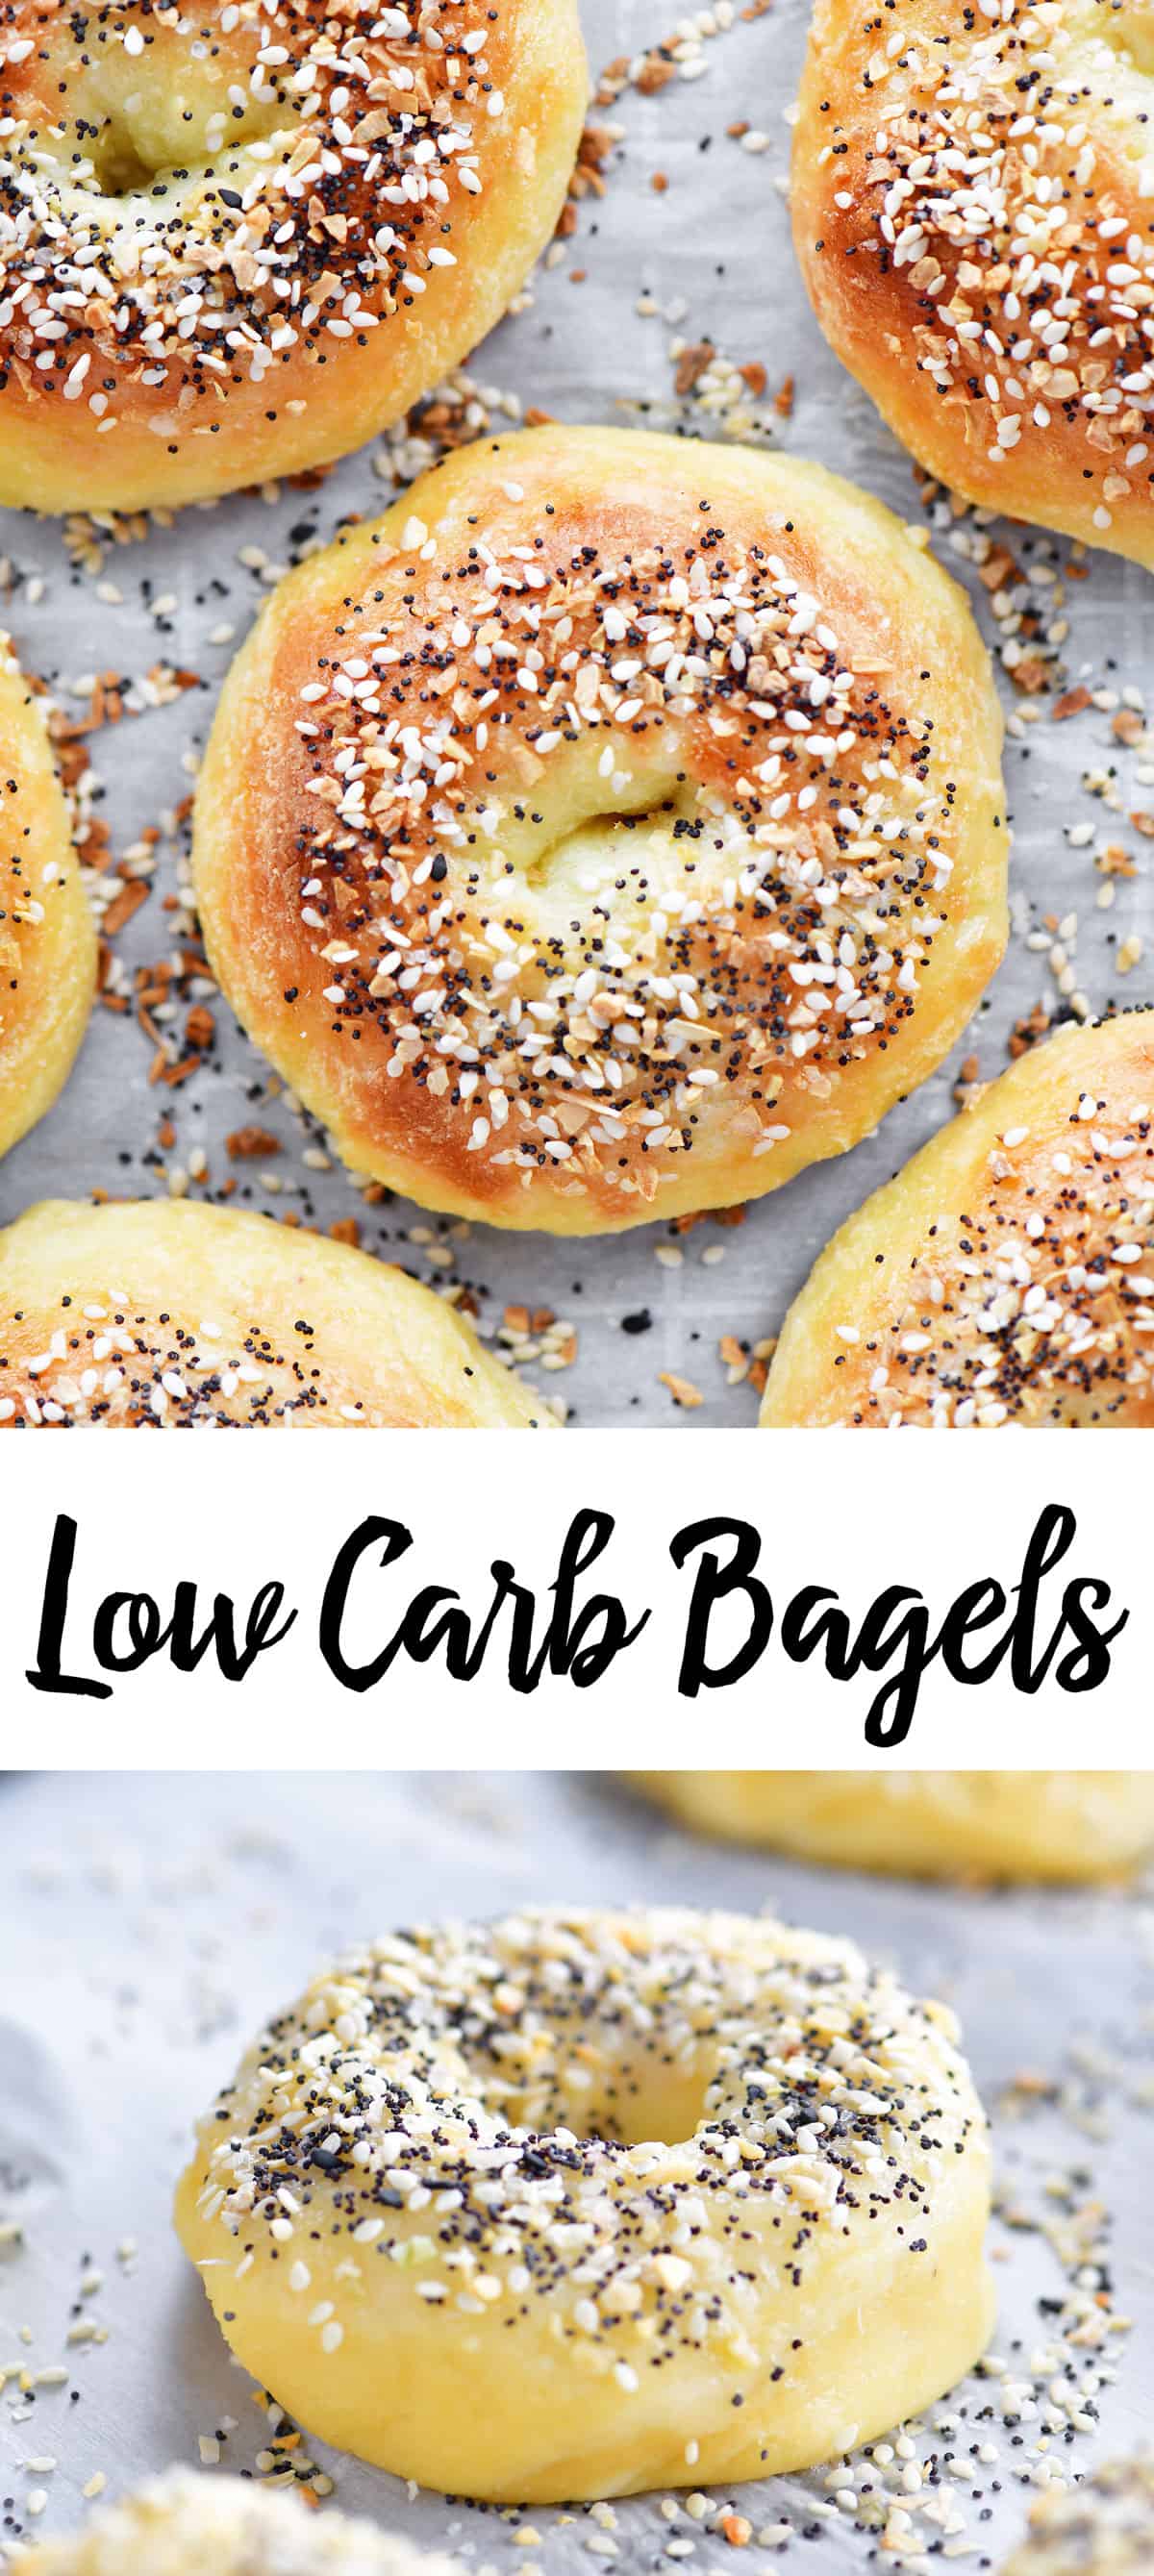 low carb bagels photo collage